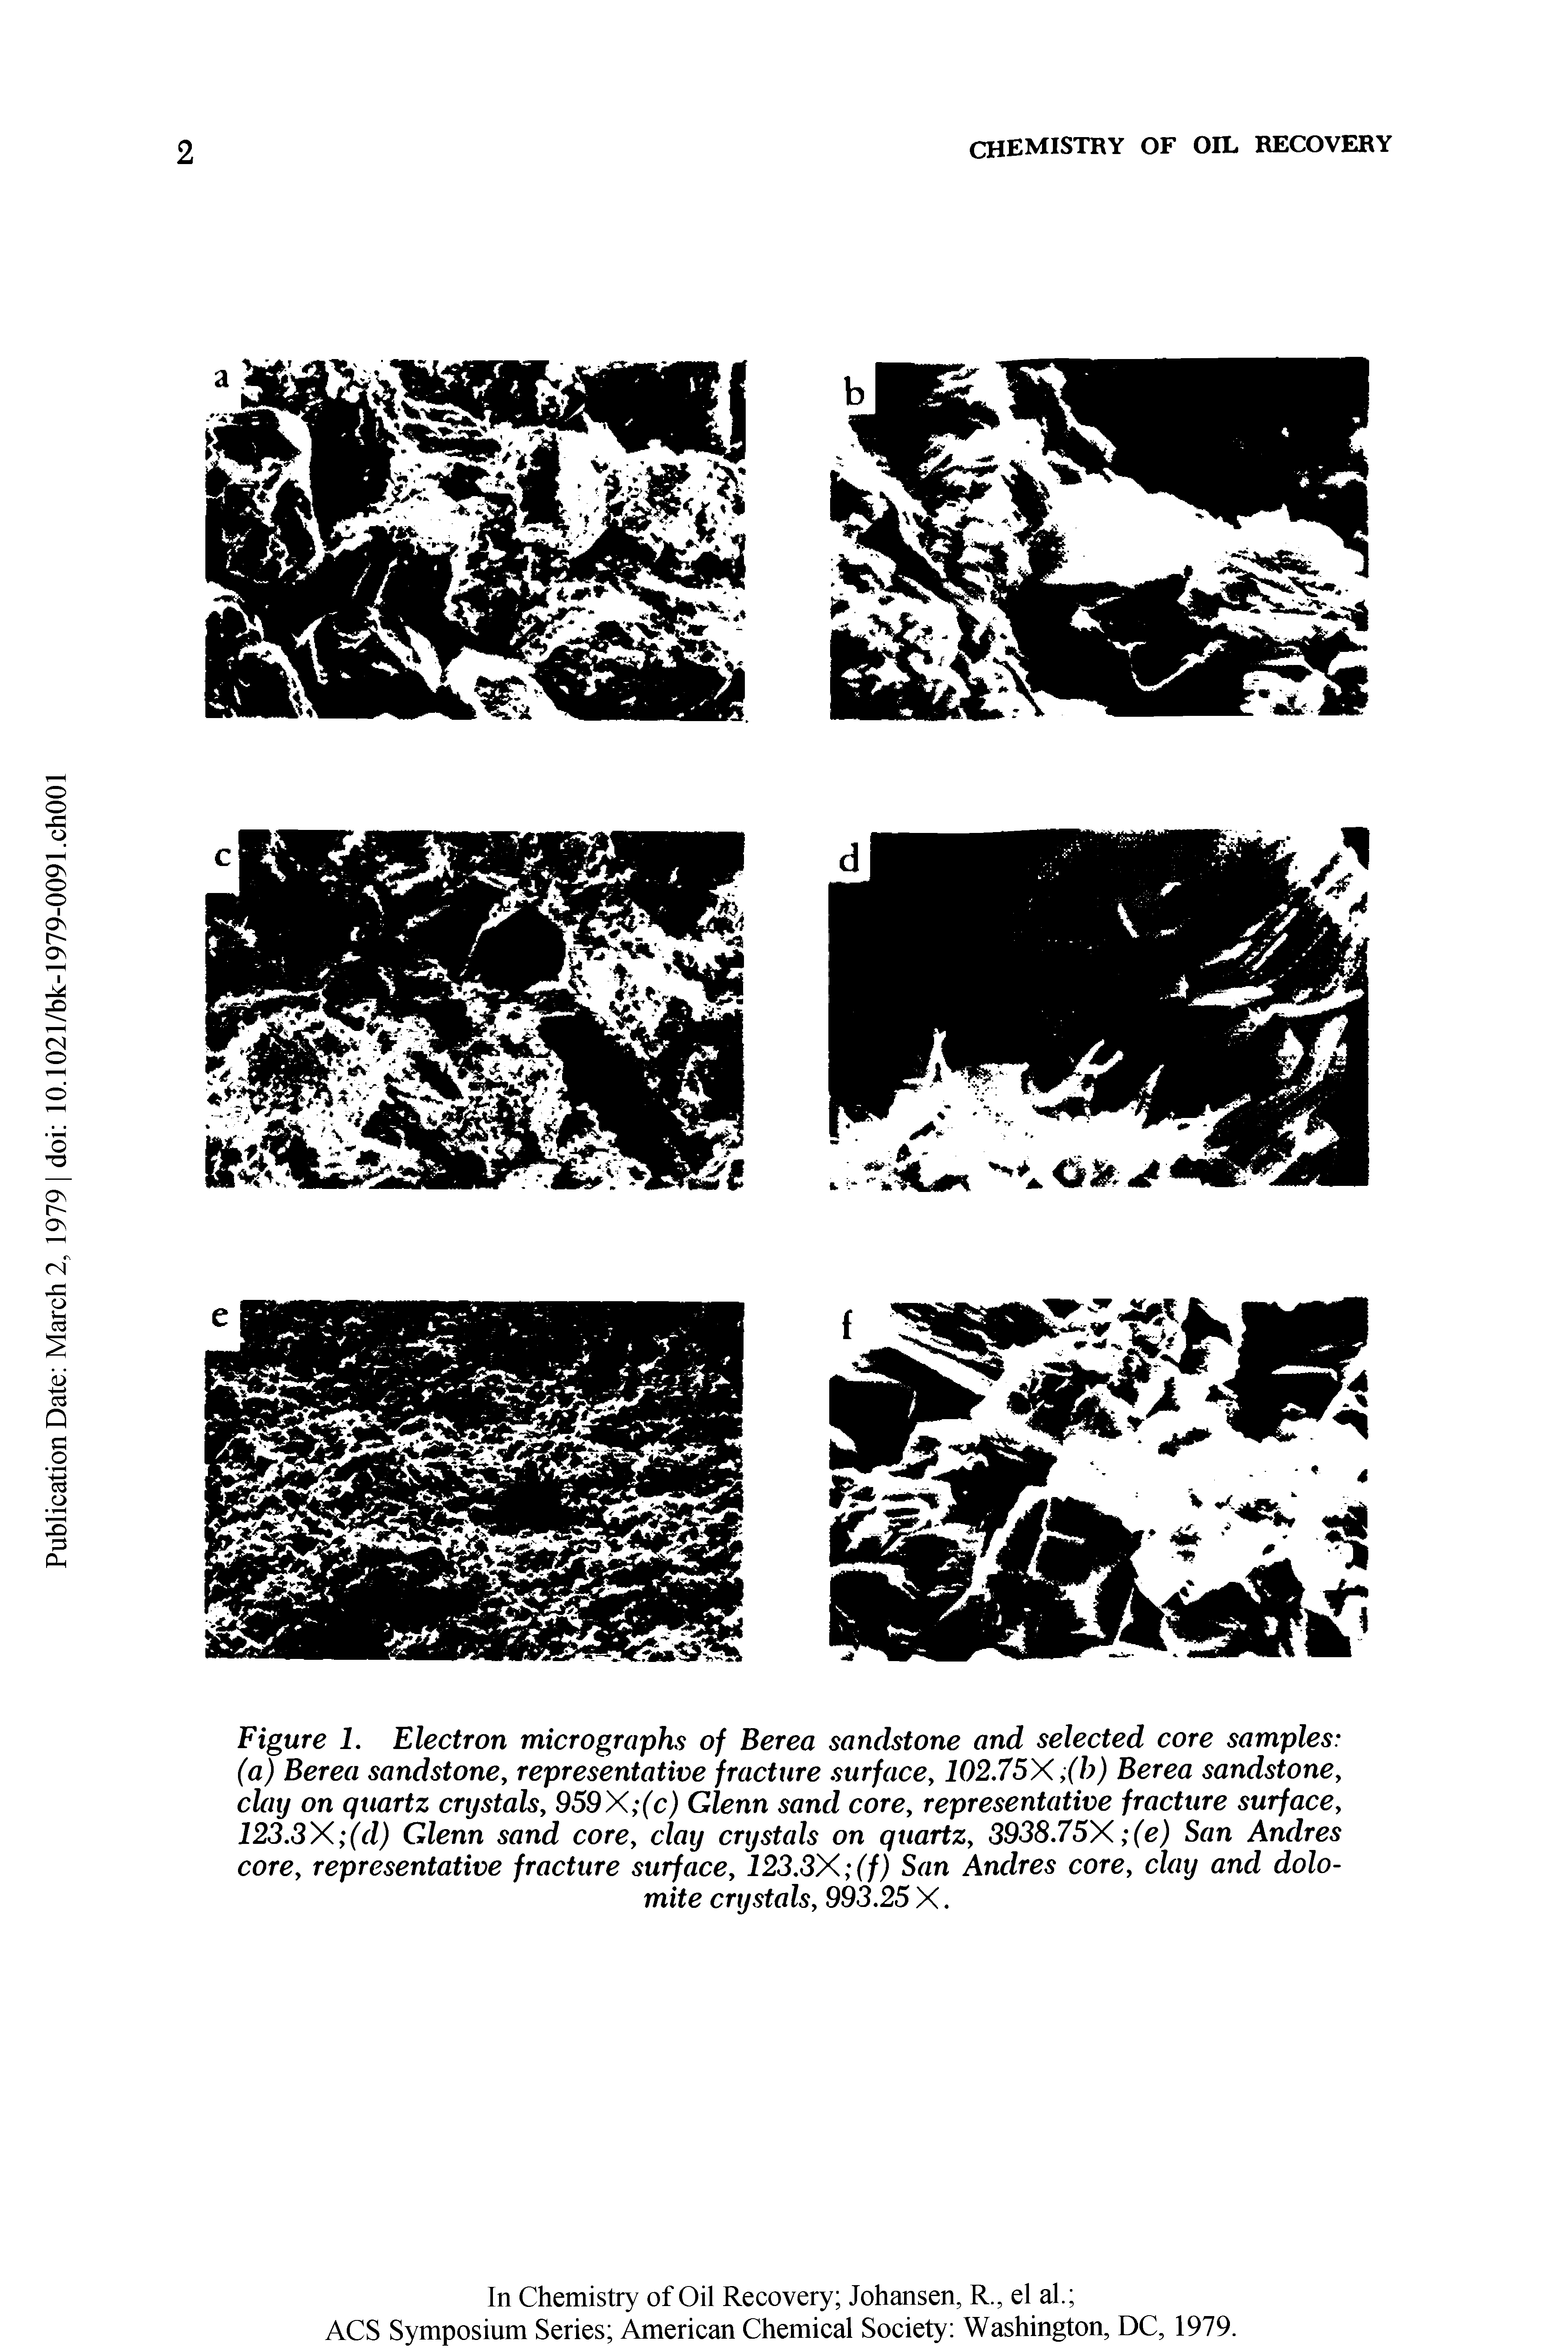 Figure 1. Electron micrographs of Berea sandstone and selected core samples (a) Berea sandstone, representative fracture surface, 102.75X (h) Berea sandstone, clay on quartz crystals, 959X (c) Glenn sand core, representative fracture surface, 123.3X (d) Glenn sand core, clay crystals on quartz, 3938.75X (e) San Andres core, representative fracture surface, 123.3X (f) San Andres core, clay and dolomite crystals, 993.25 X.